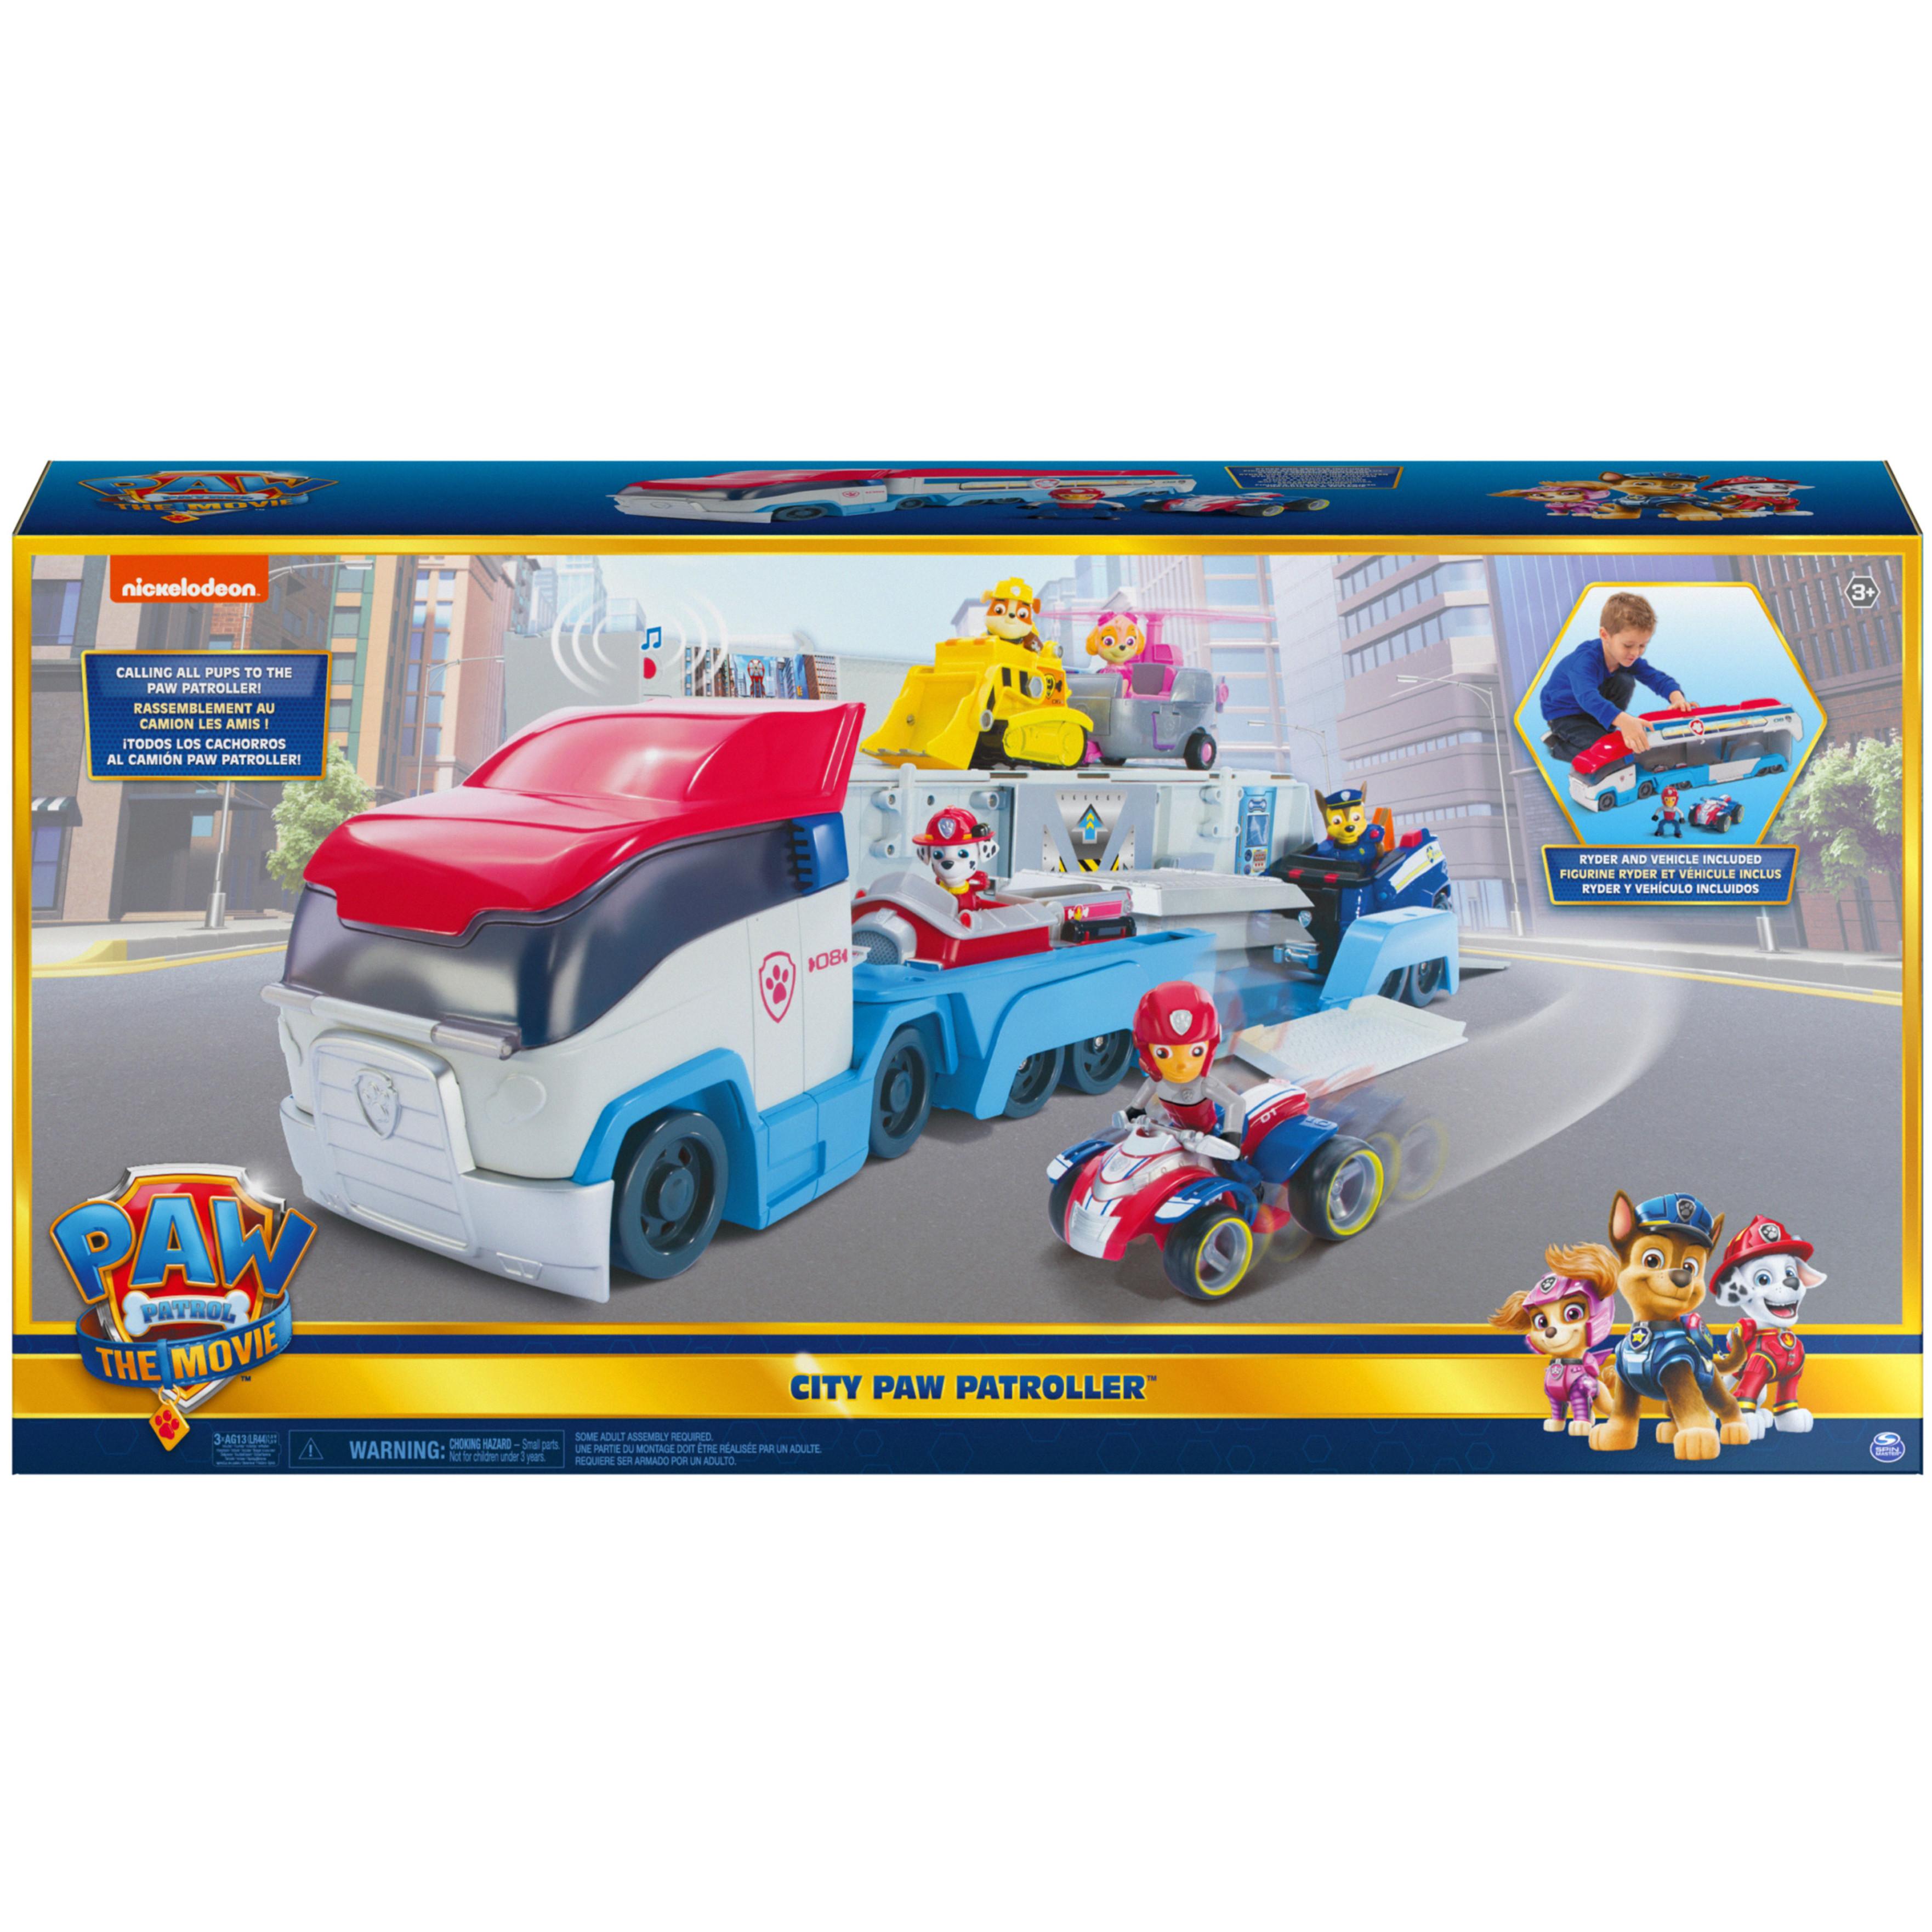 PAW Patrol, Transforming City PAW Patroller Vehicle (Walmart Exclusive), for Ages 3 and up - image 2 of 8